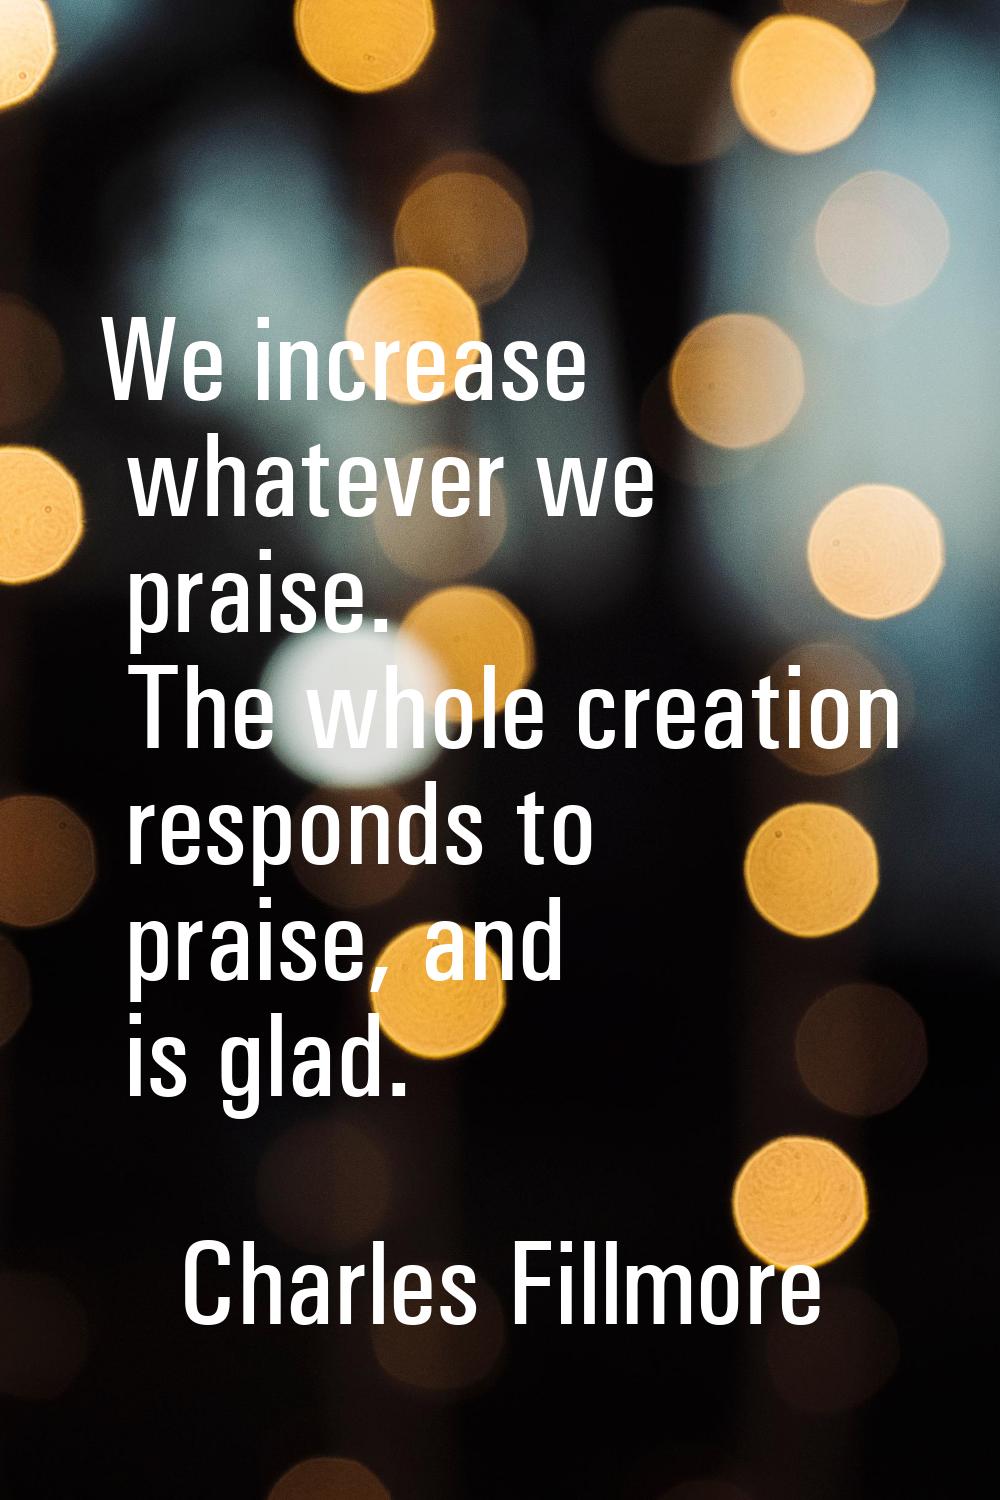 We increase whatever we praise. The whole creation responds to praise, and is glad.